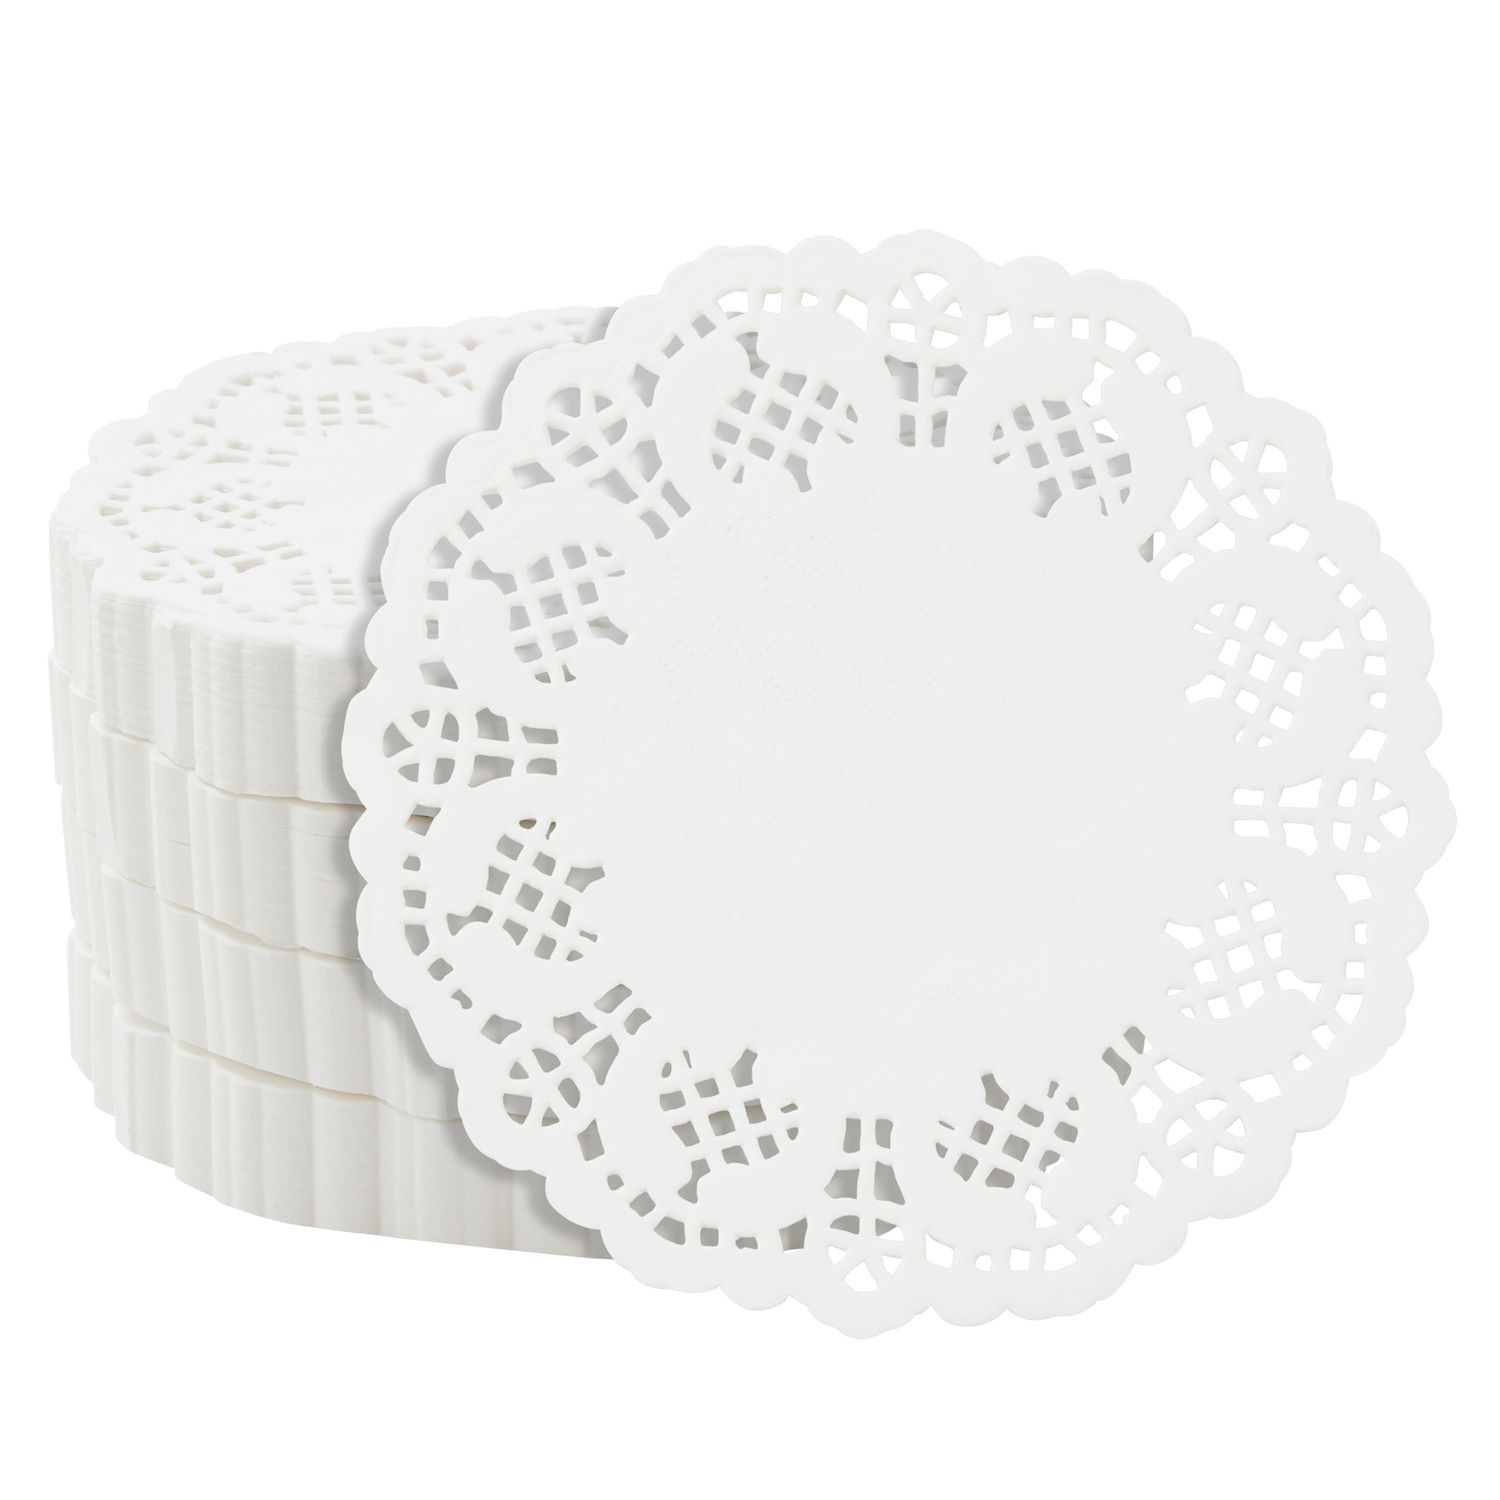  Paper Doilies Assorted Sizes - White Round Lace Paper Doilies  for Cakes, Desserts, Tableware Food Decoration, Pack of 150(6, 8, and 10  Inch) : Home & Kitchen